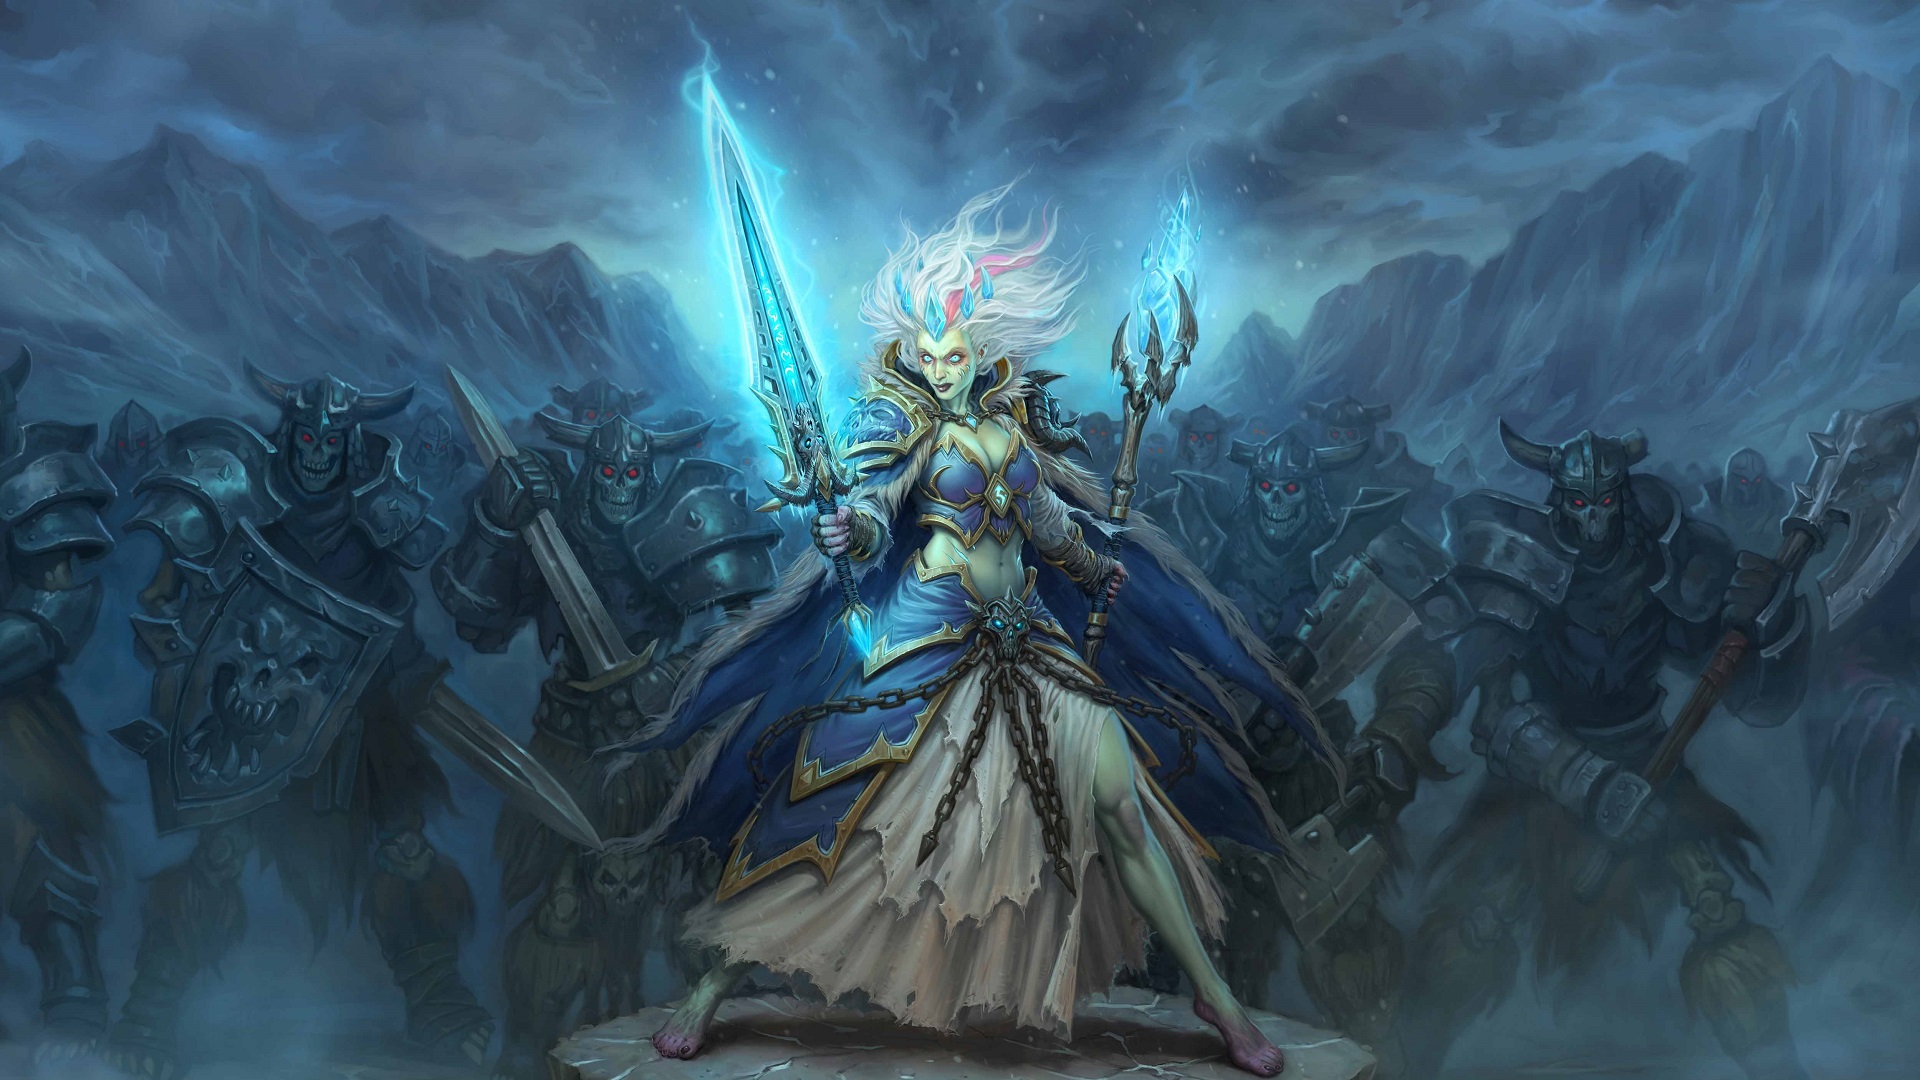 Jaina Proudmoore, Hearthstone: Heroes of Warcraft, Hearthstone, Warcraft, Cards, Artwork, Knights of the frozen throne, Death Knight, Video games Wallpaper